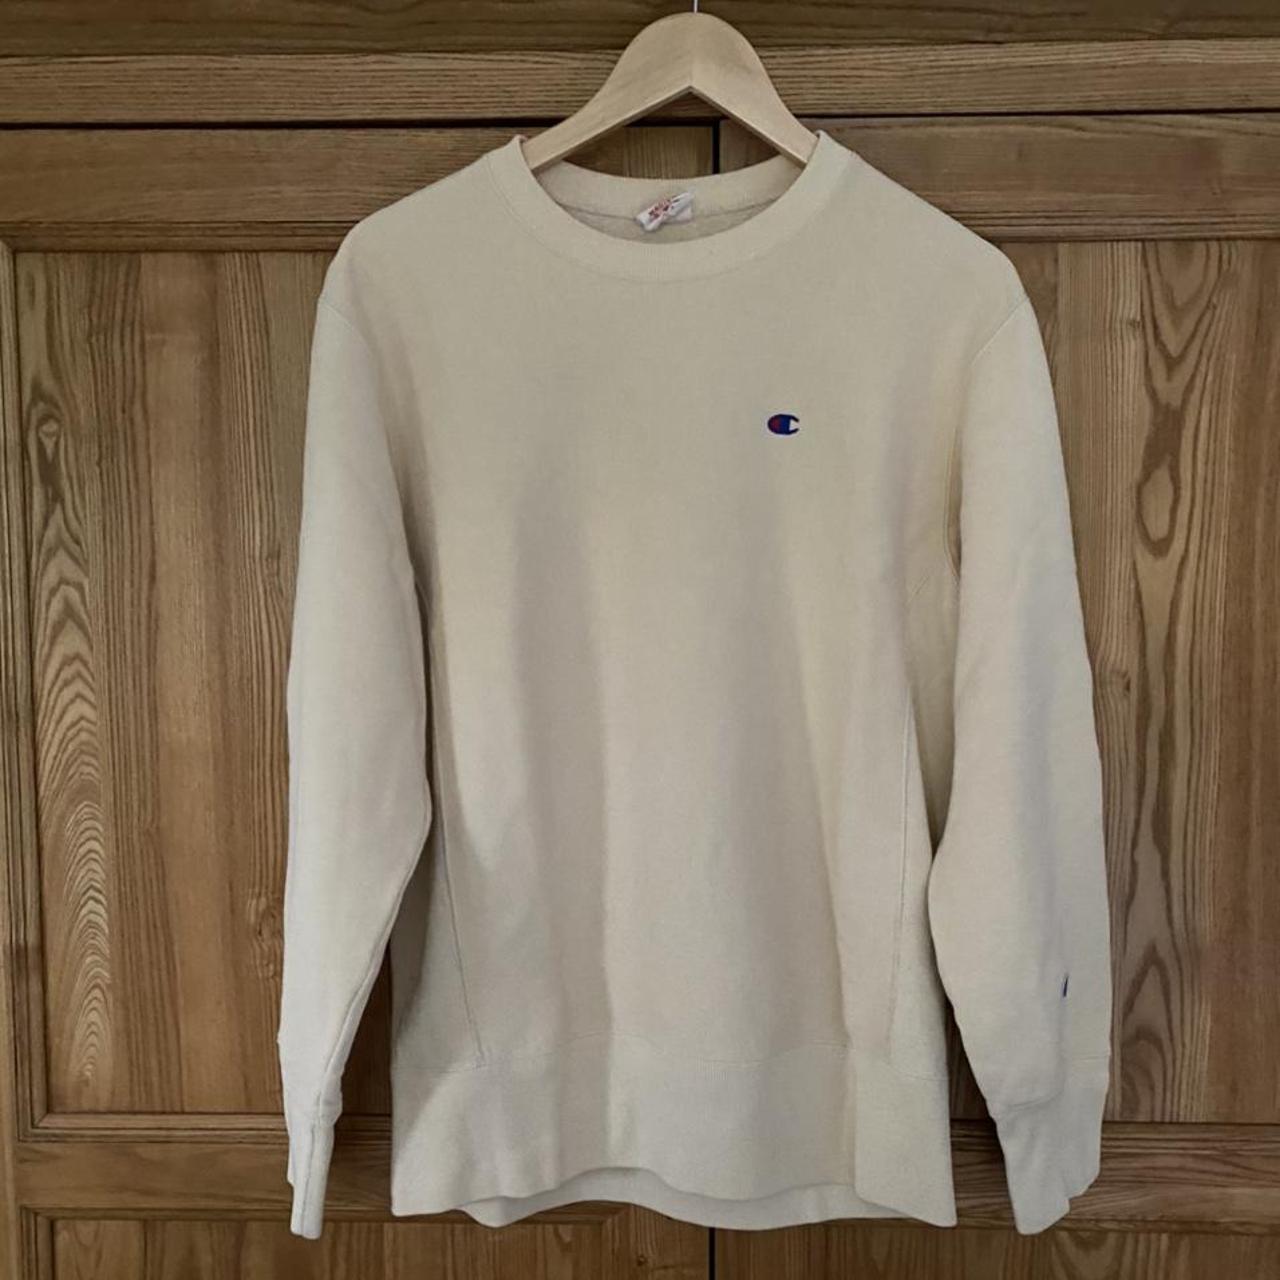 Product Image 1 - Champion Reverse-Weave Crewneck

Warm with a